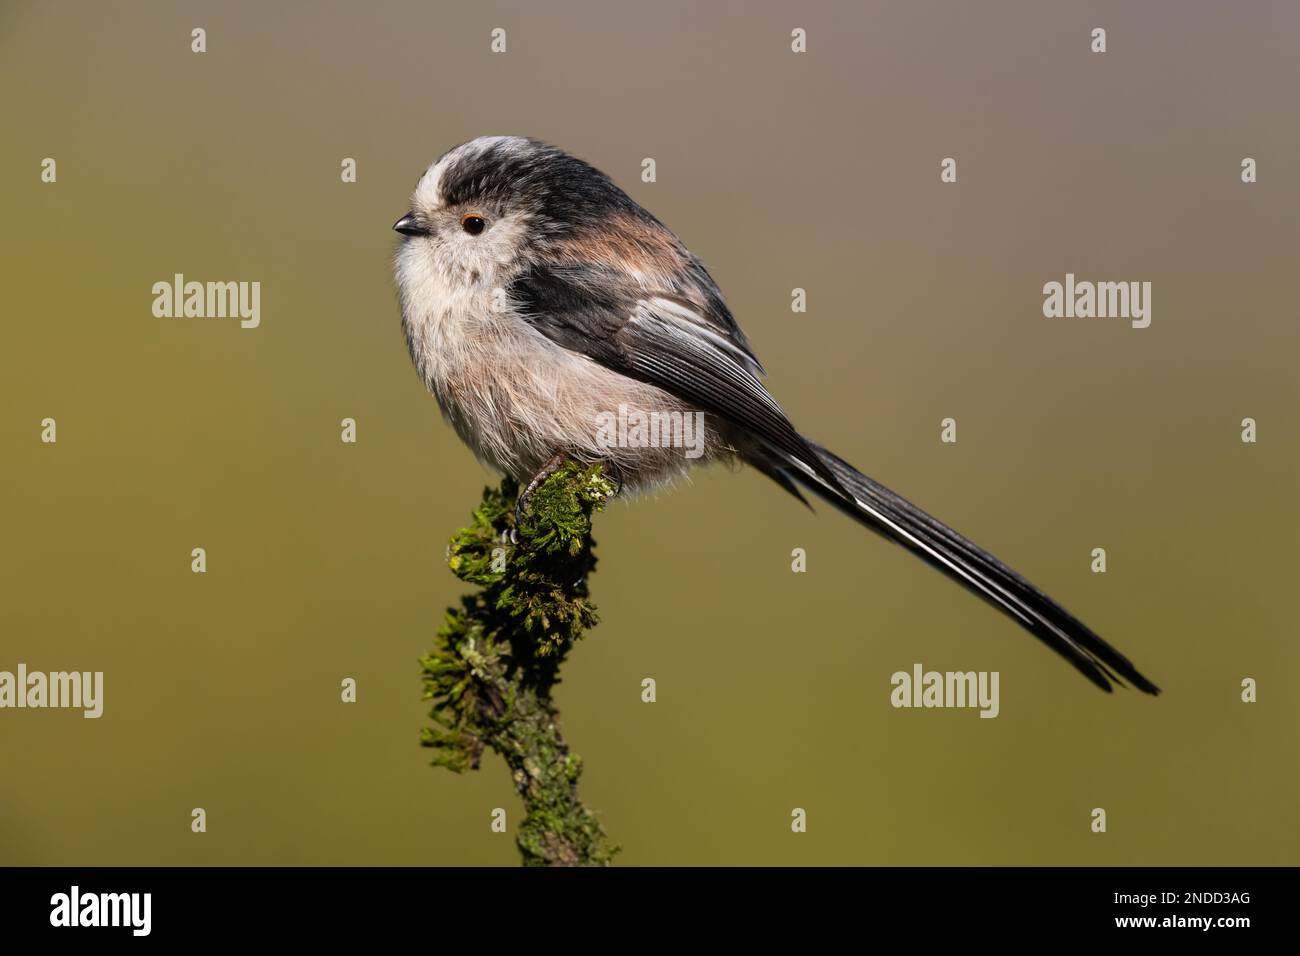 Long-tailed Tit perched on a mossy twig Stock Photo